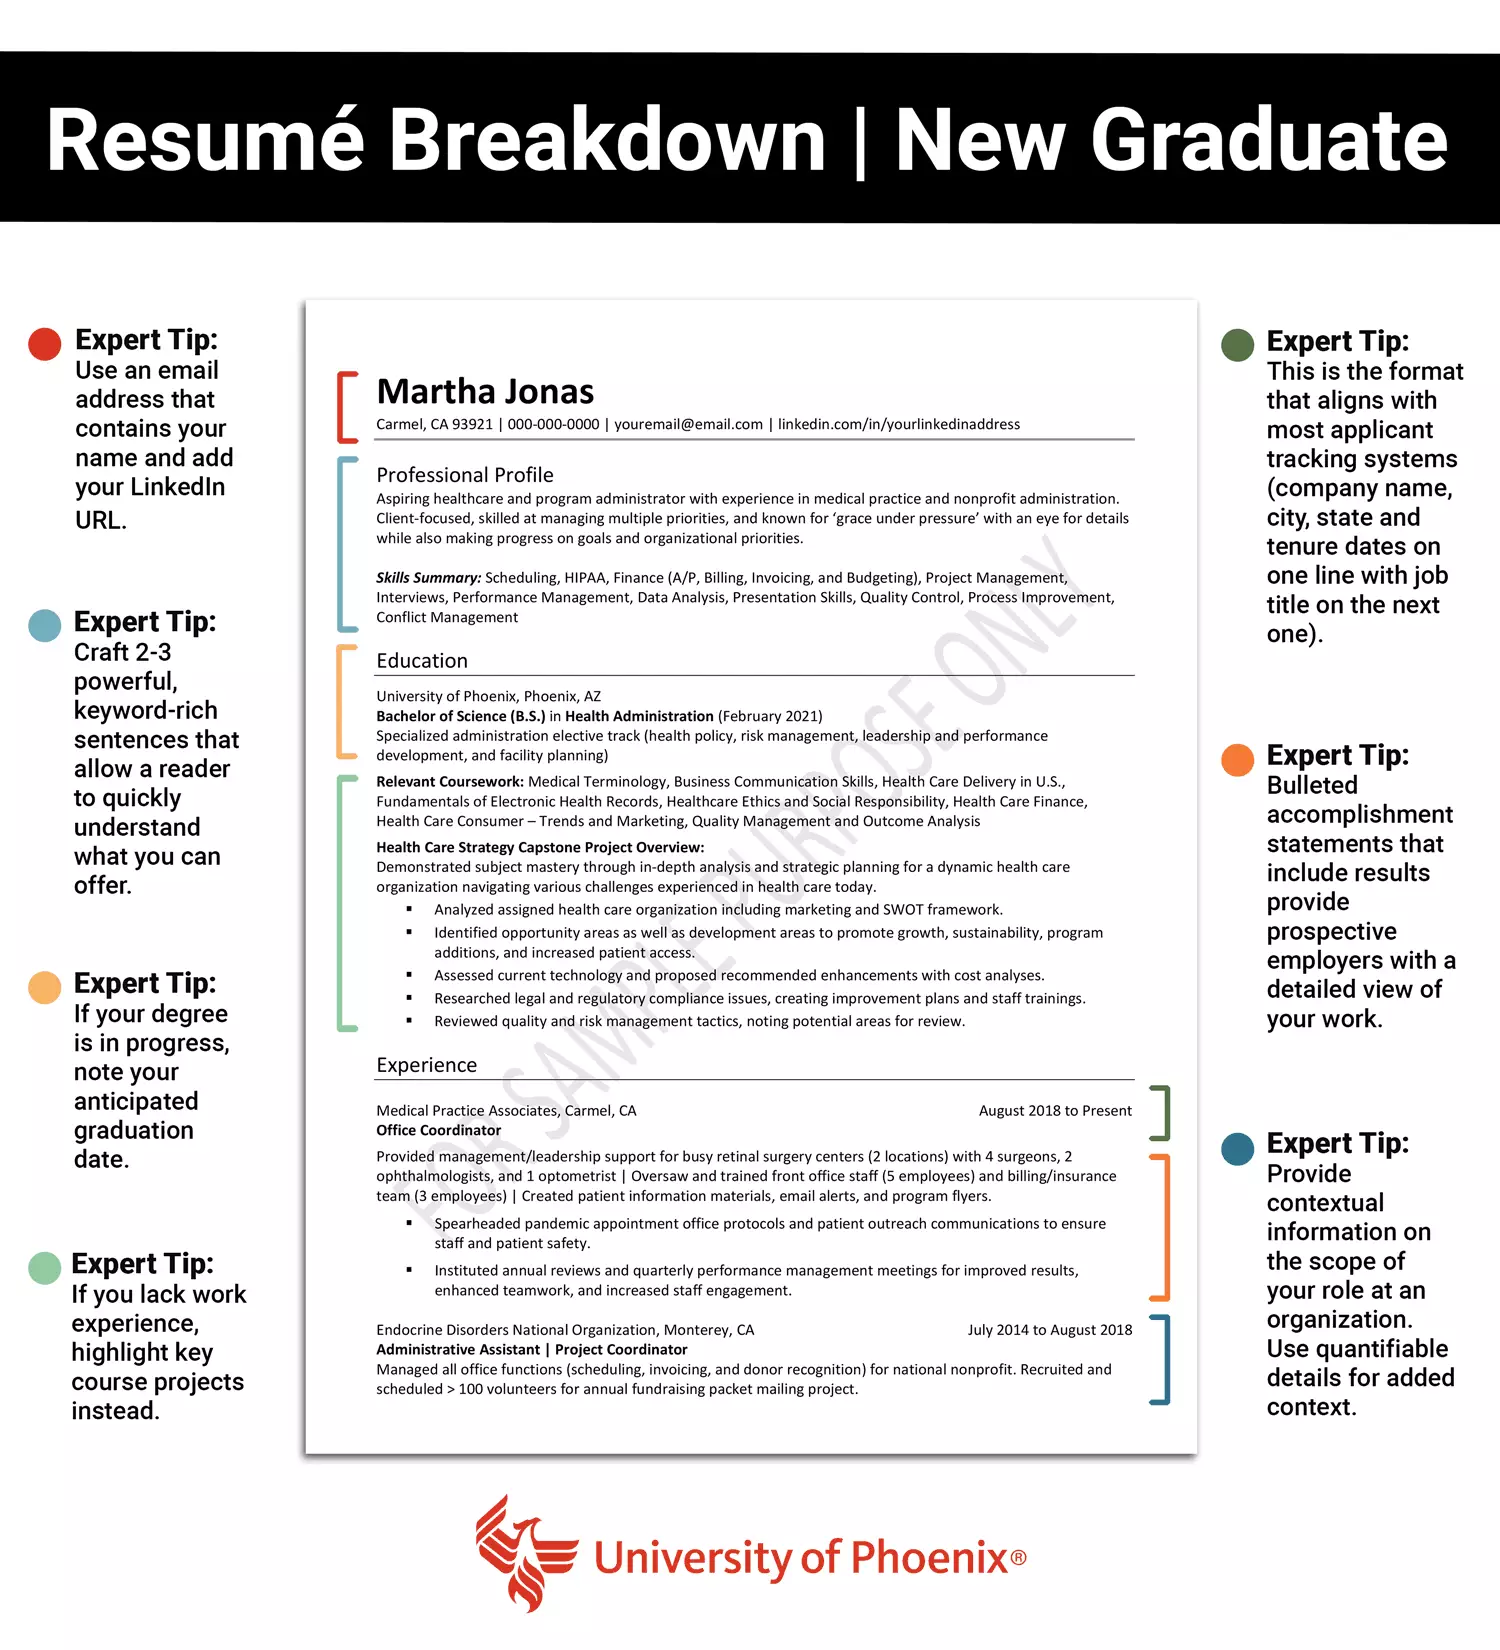 Download the Resumé breakdown infographic for a new graduate